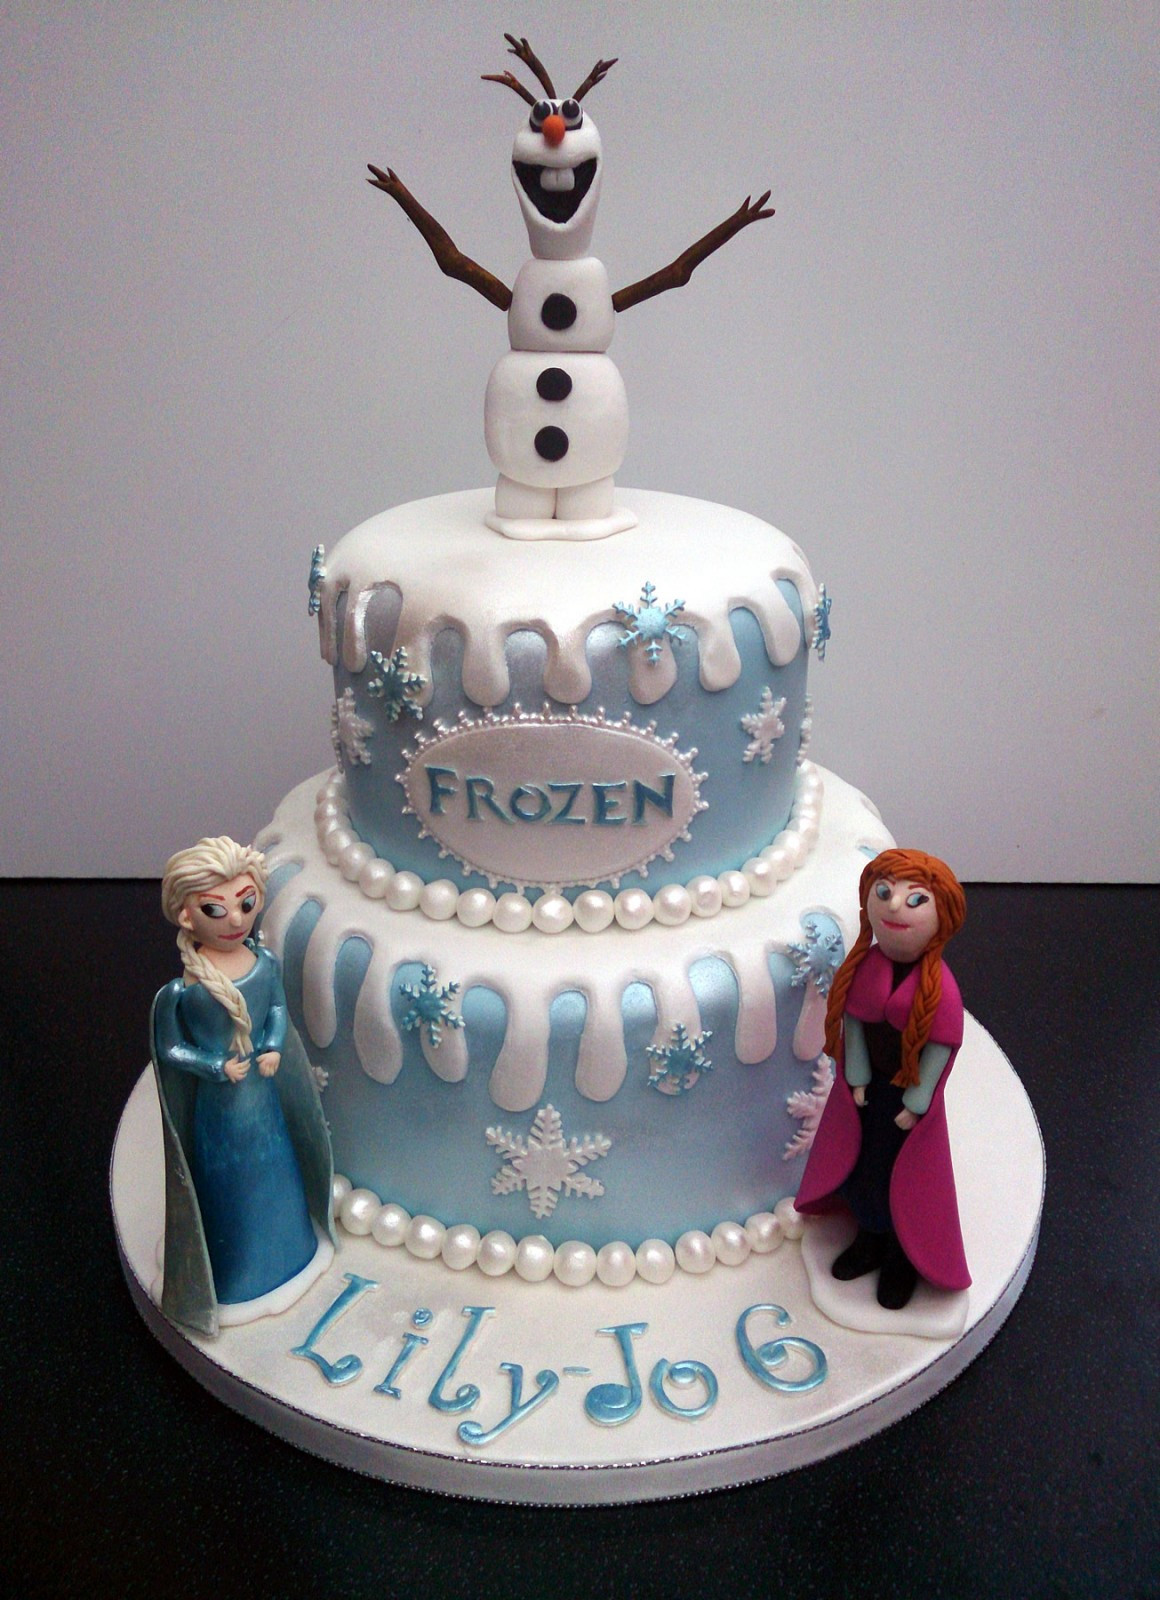 Frozen Birthday Cakes
 Disney Frozen Themed Cake With Olaf Anna and Elsa Susie